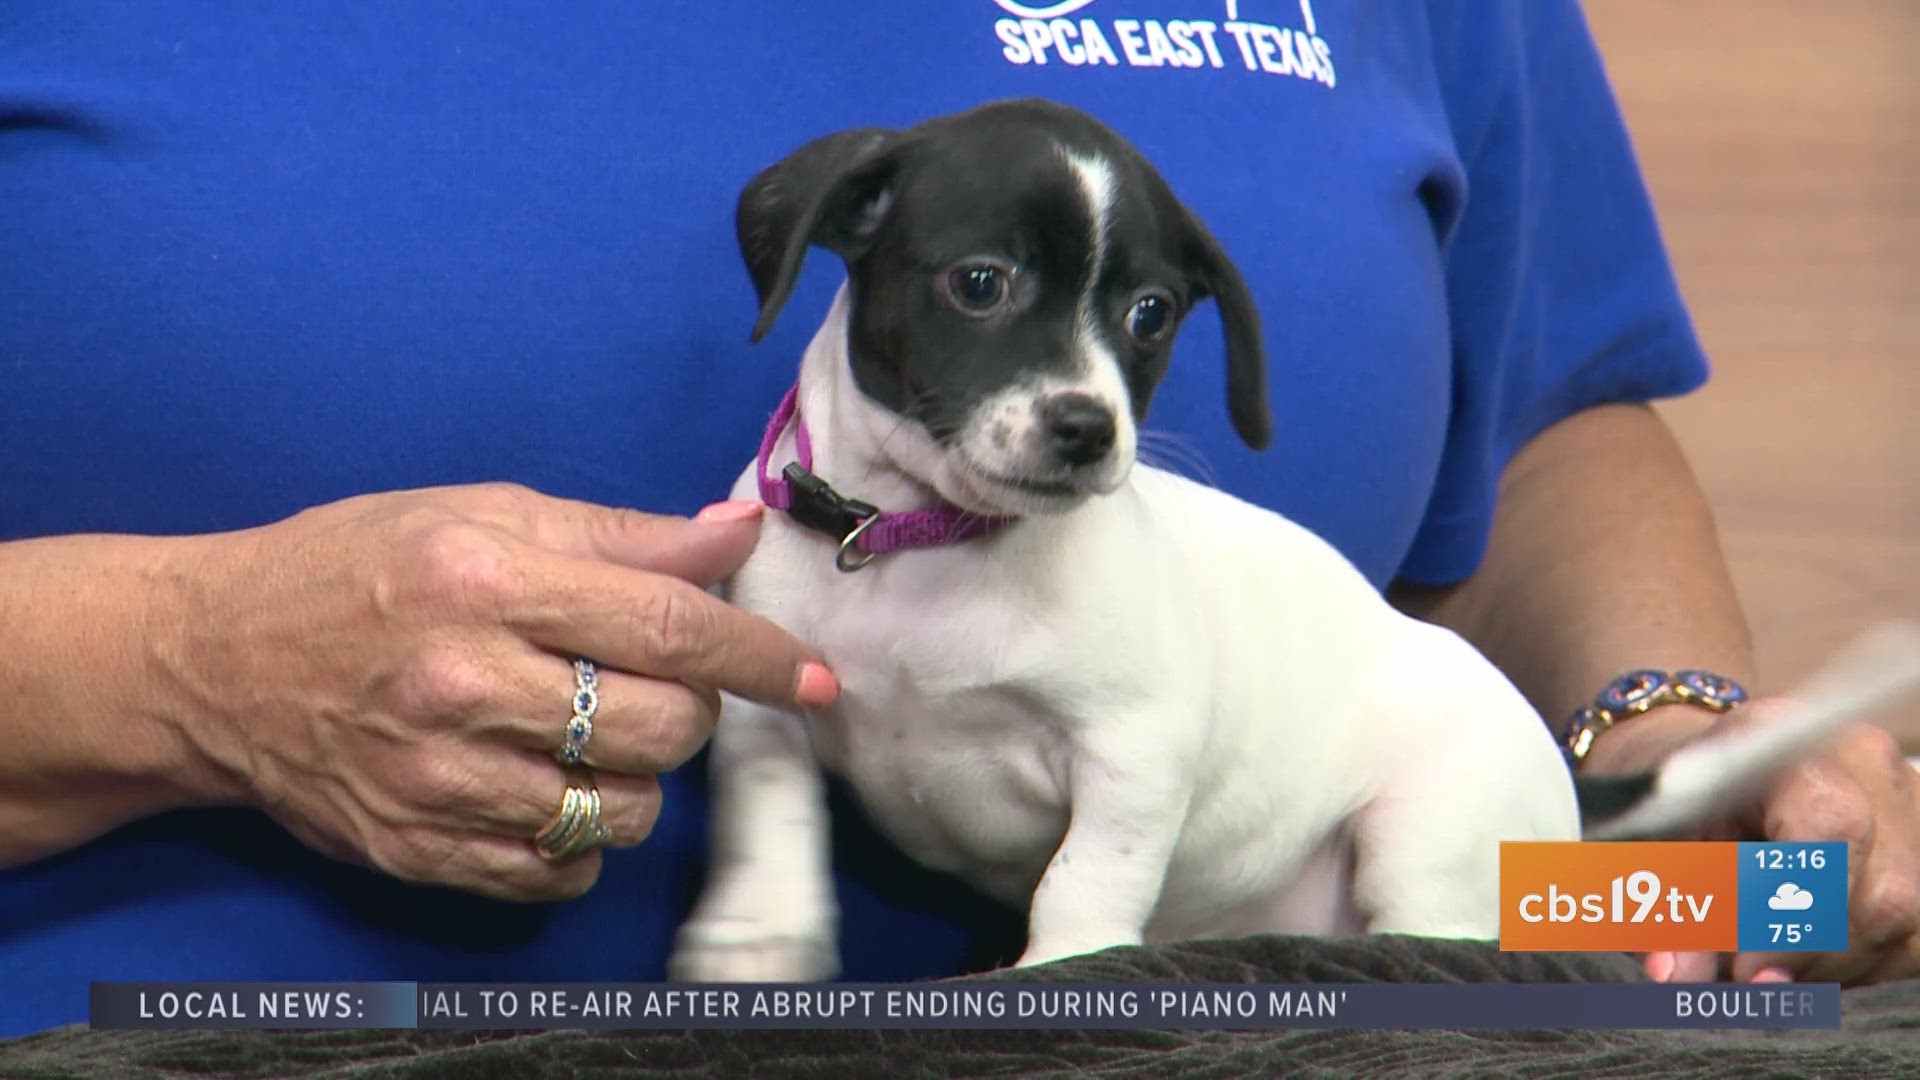 TUESDAY TAILS: Meet Pepper from the SPCA of East Texas